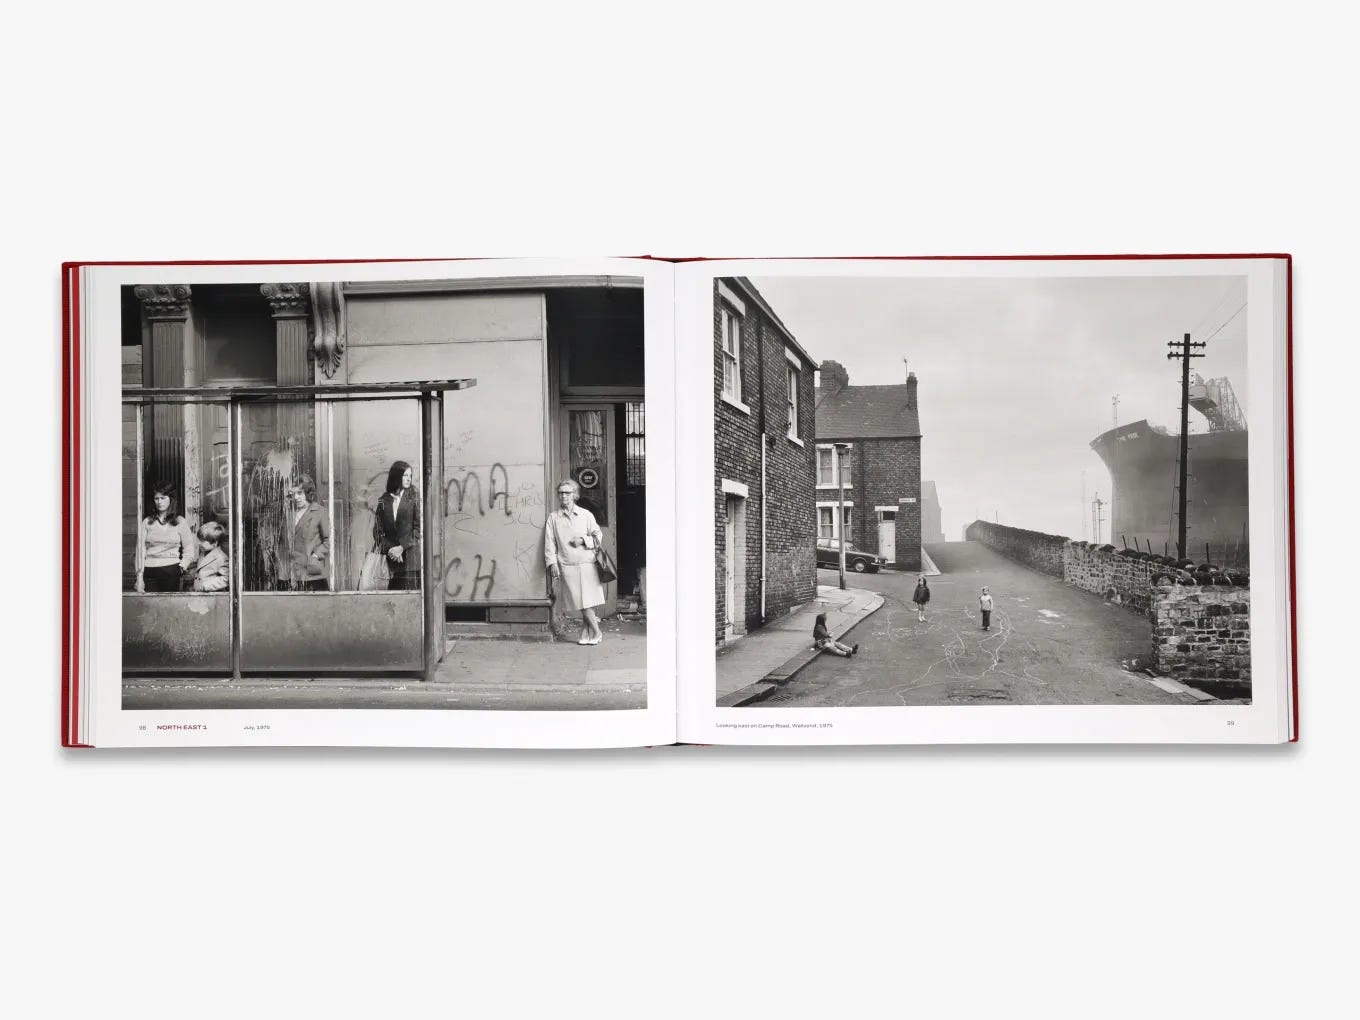 Photograph of an open book laid on a white surface, its pages featuring two large black-and-white images by Chris Killip of Britain in the 1970s; on the left, women and children wait at a bus stop and on the right, three children are in a street between some brick houses and, at right, a giant ship